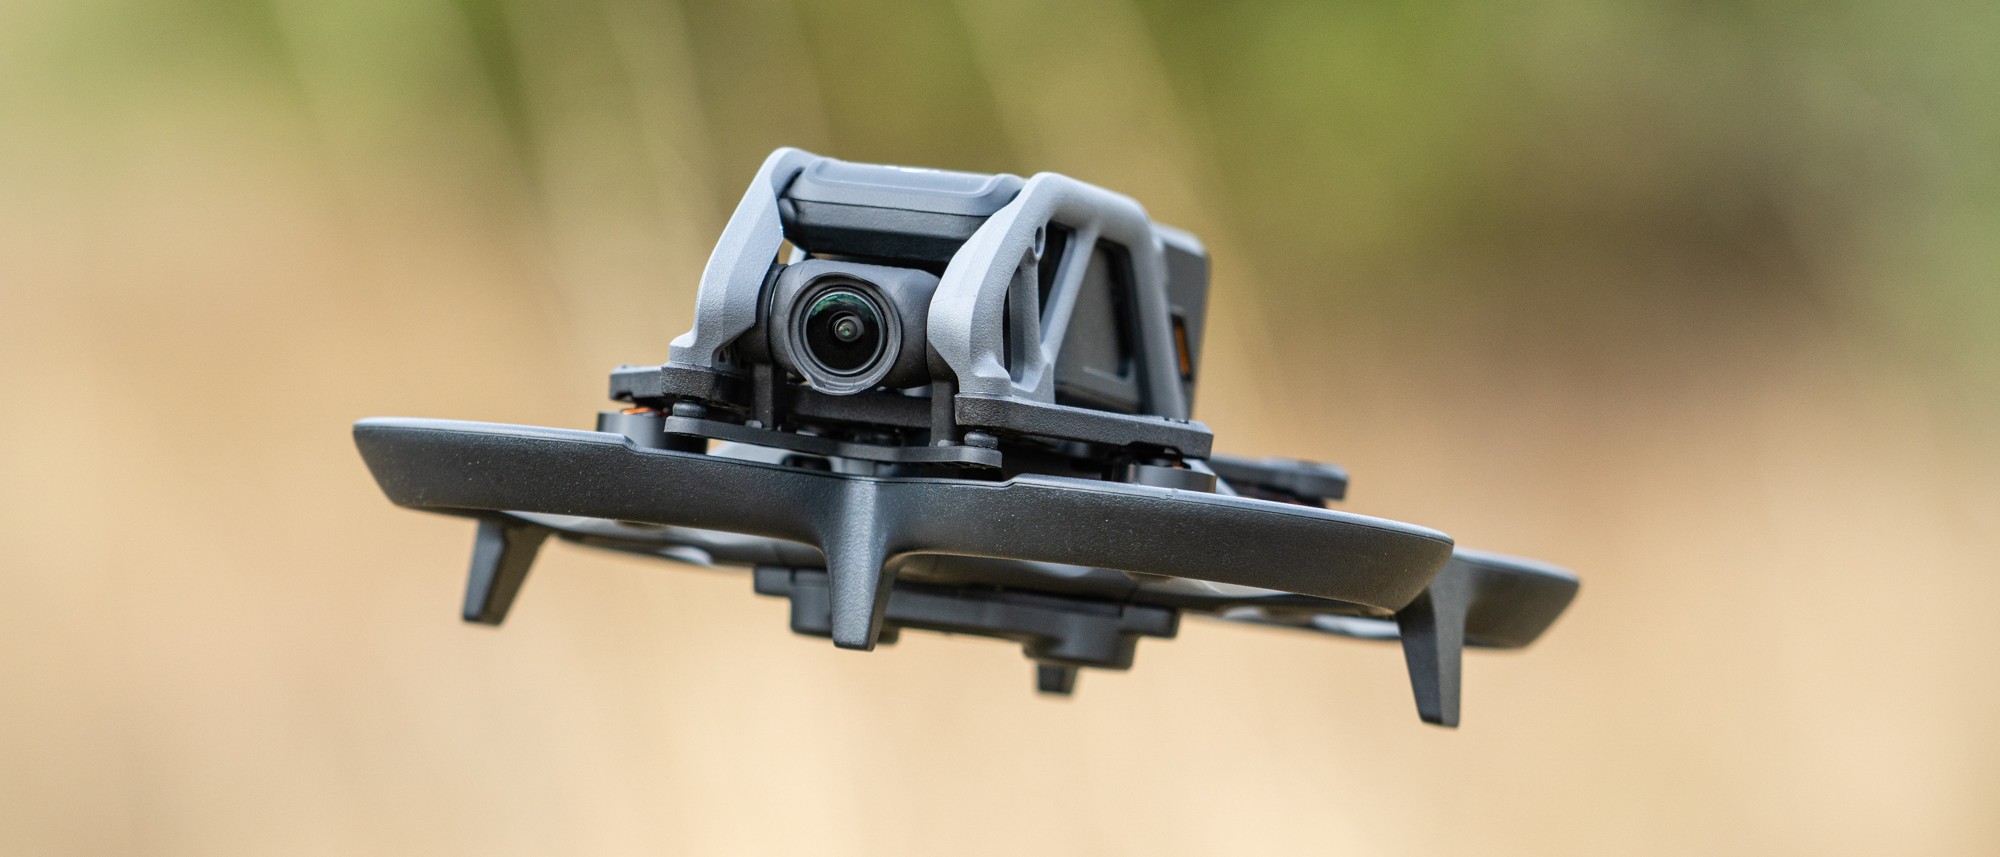 DJI Avatar 2 Release: Improved Performance & Safety Features